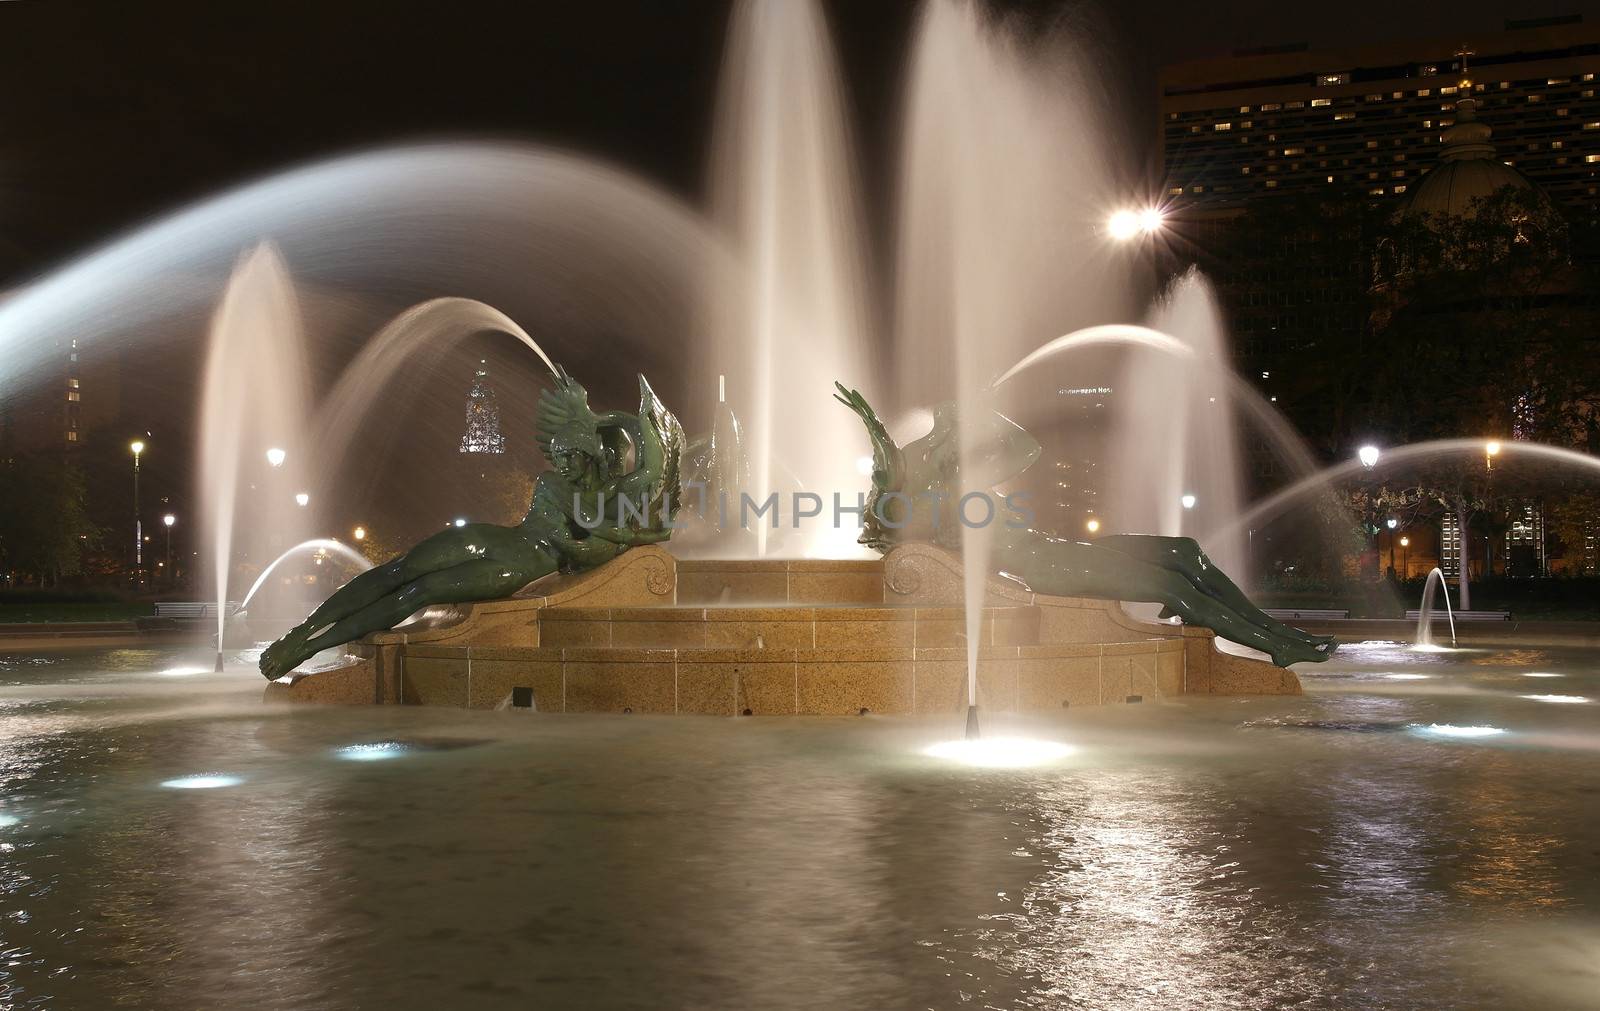 Swann memorial fountain in downtown Philadelphia at night by gary718